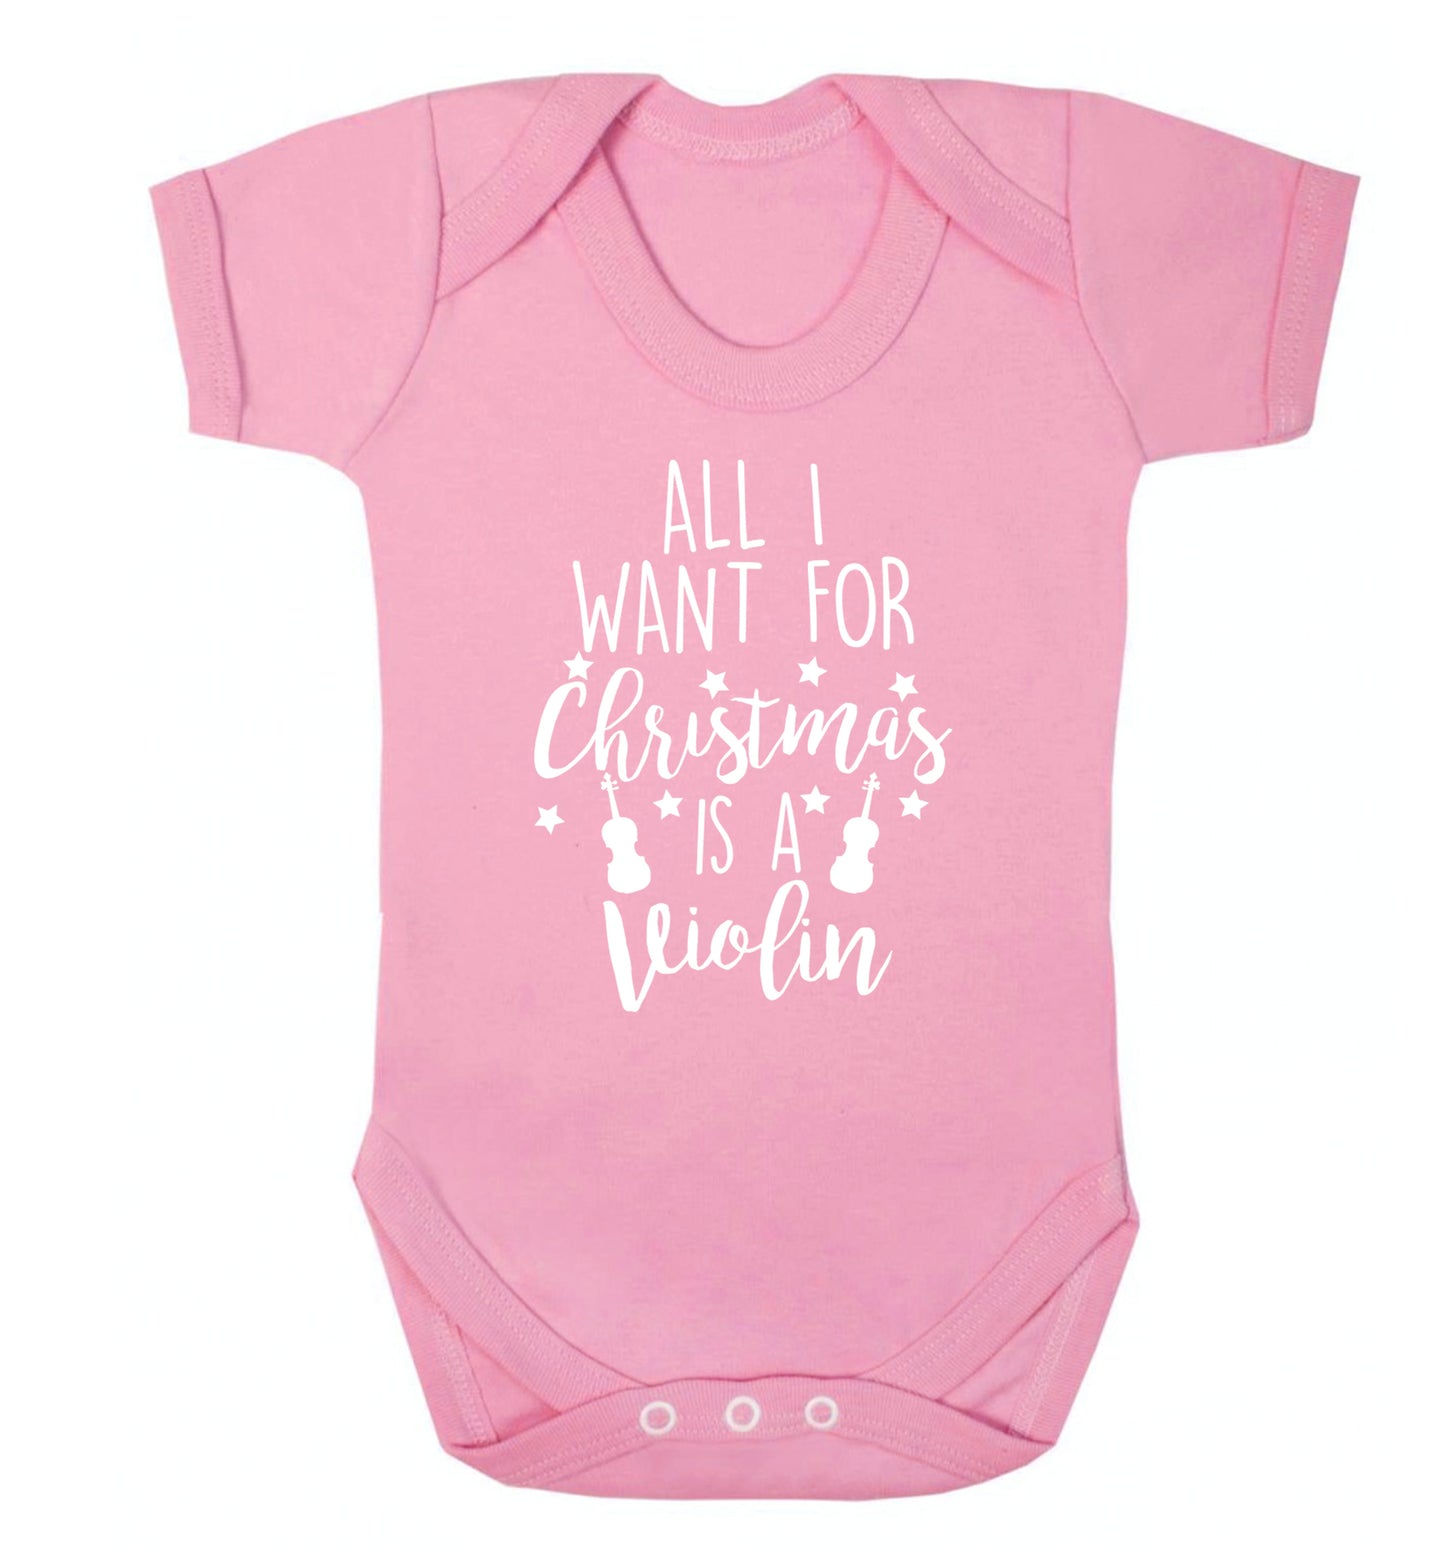 All I Want For Christmas is a Violin Baby Vest pale pink 18-24 months